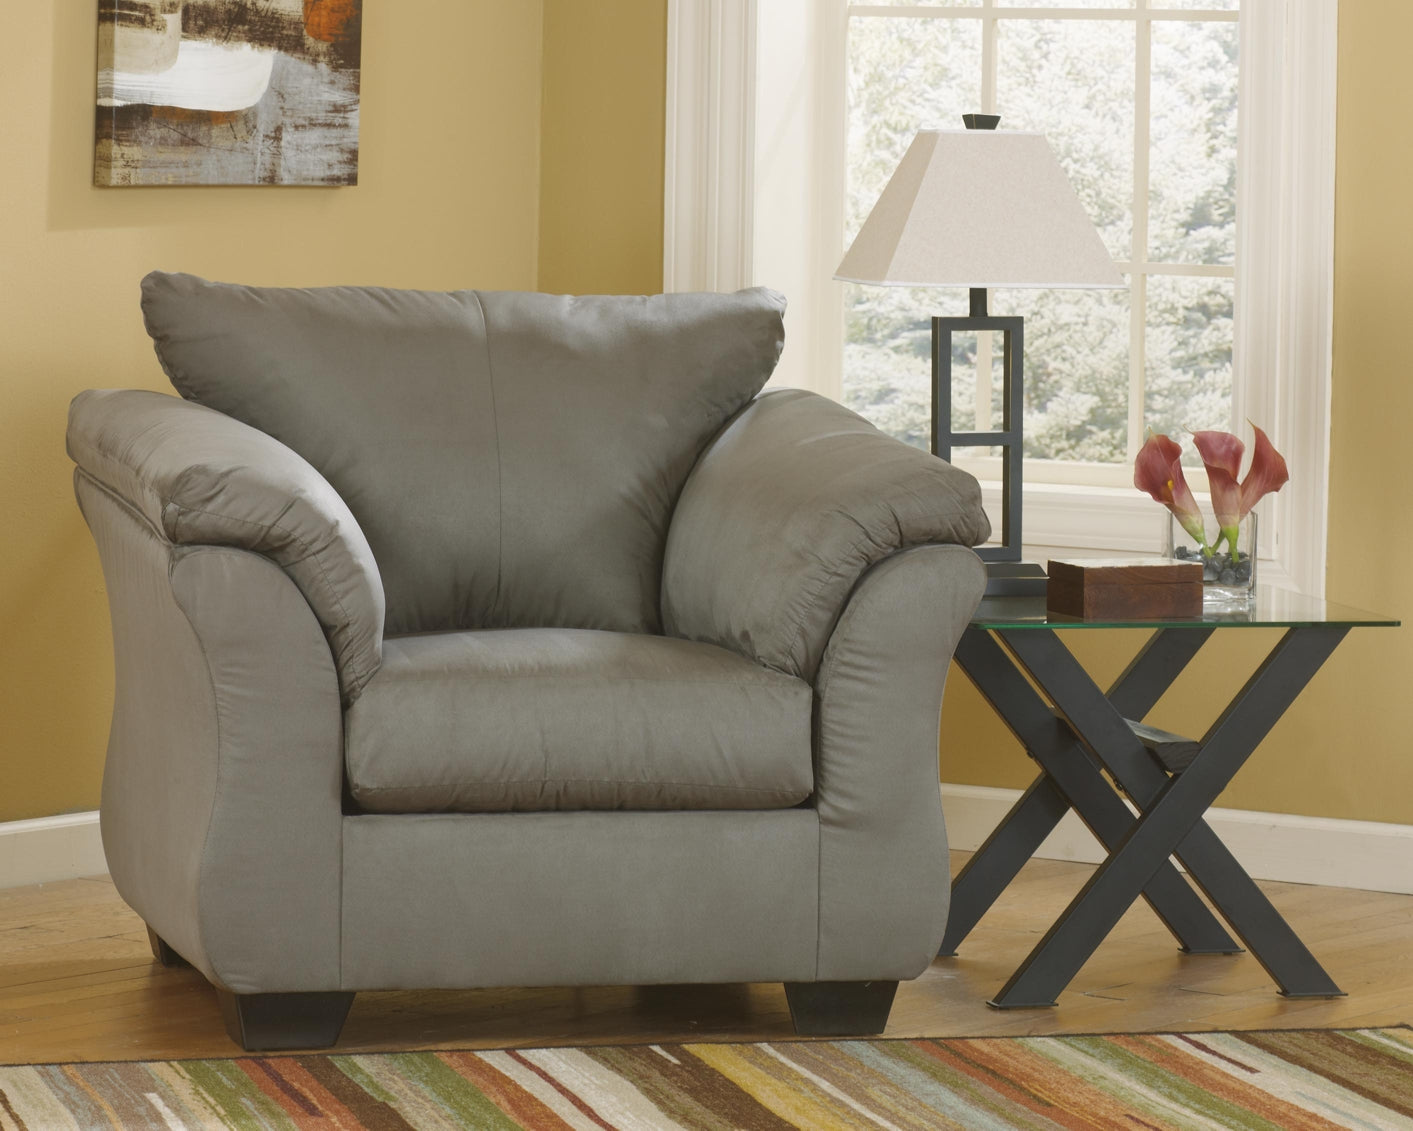 Darcy Chair JB's Furniture  Home Furniture, Home Decor, Furniture Store